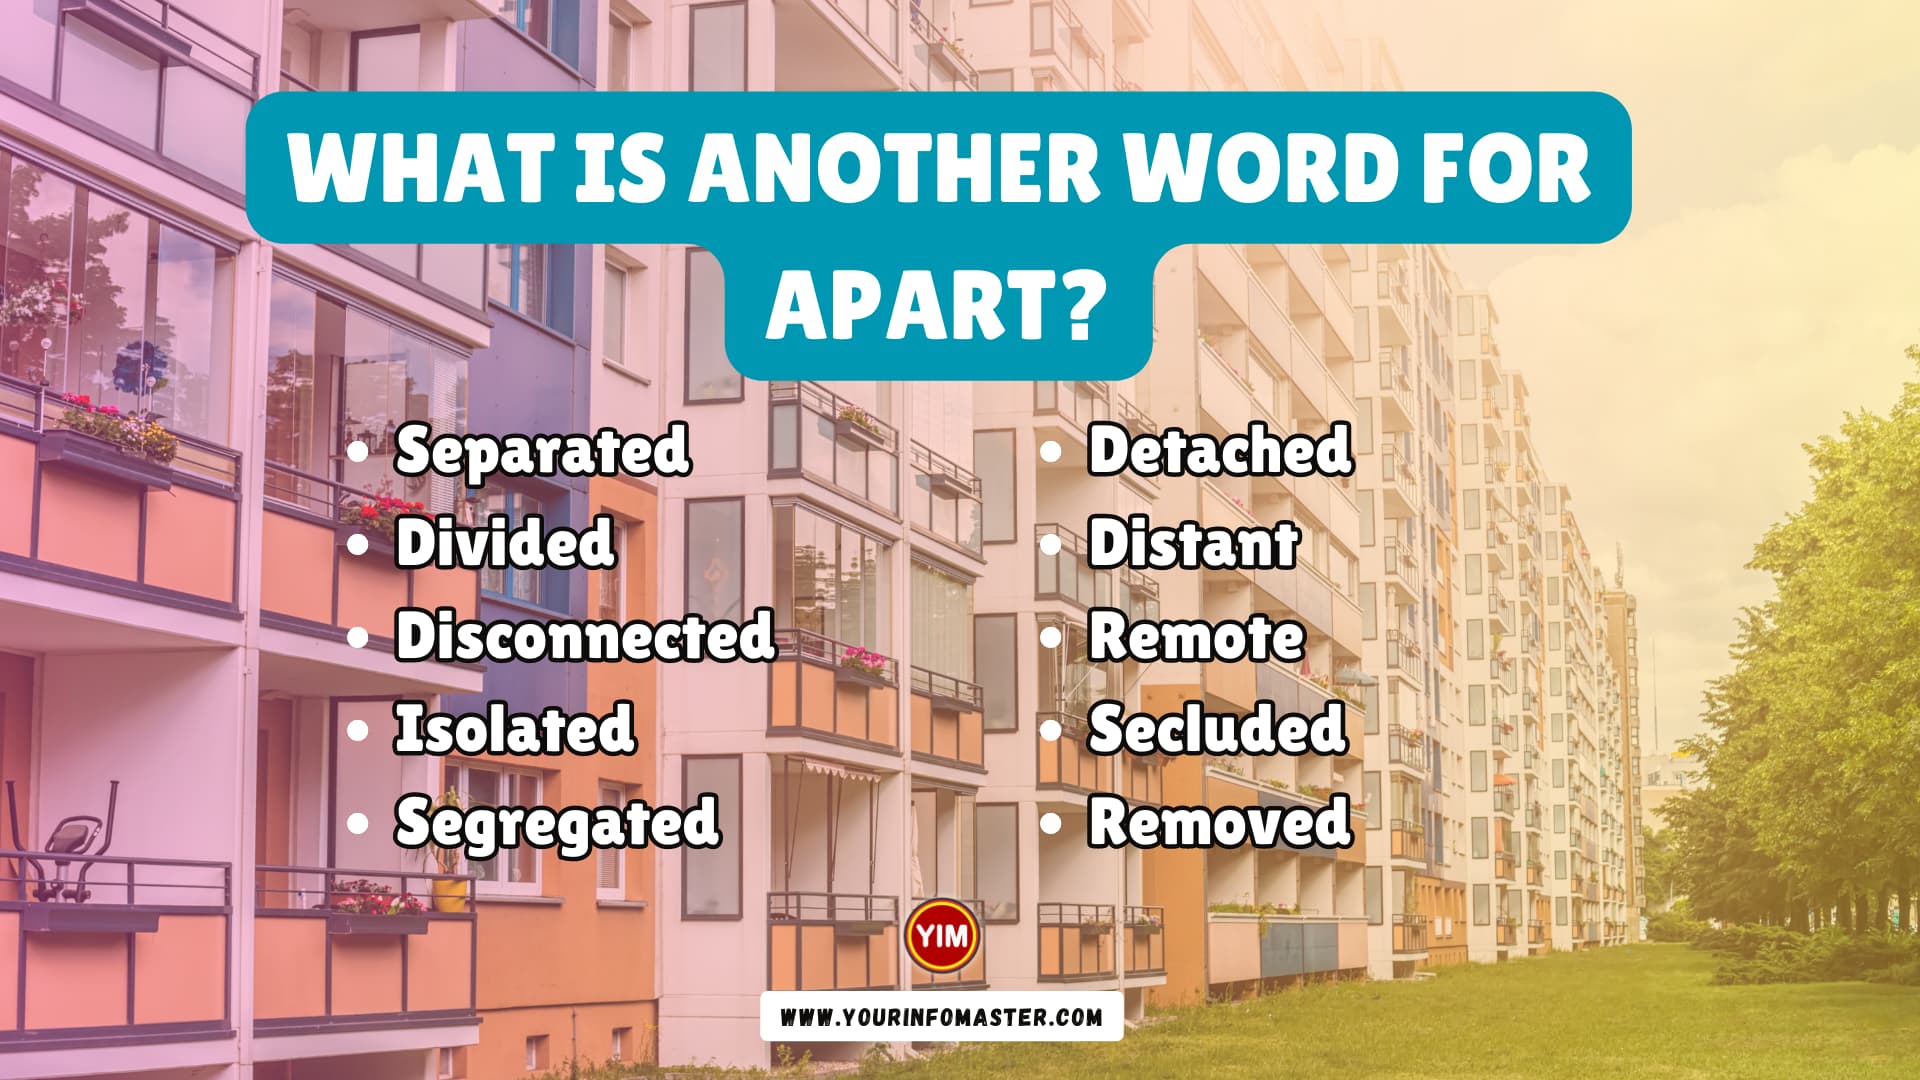 What is another word for Apart